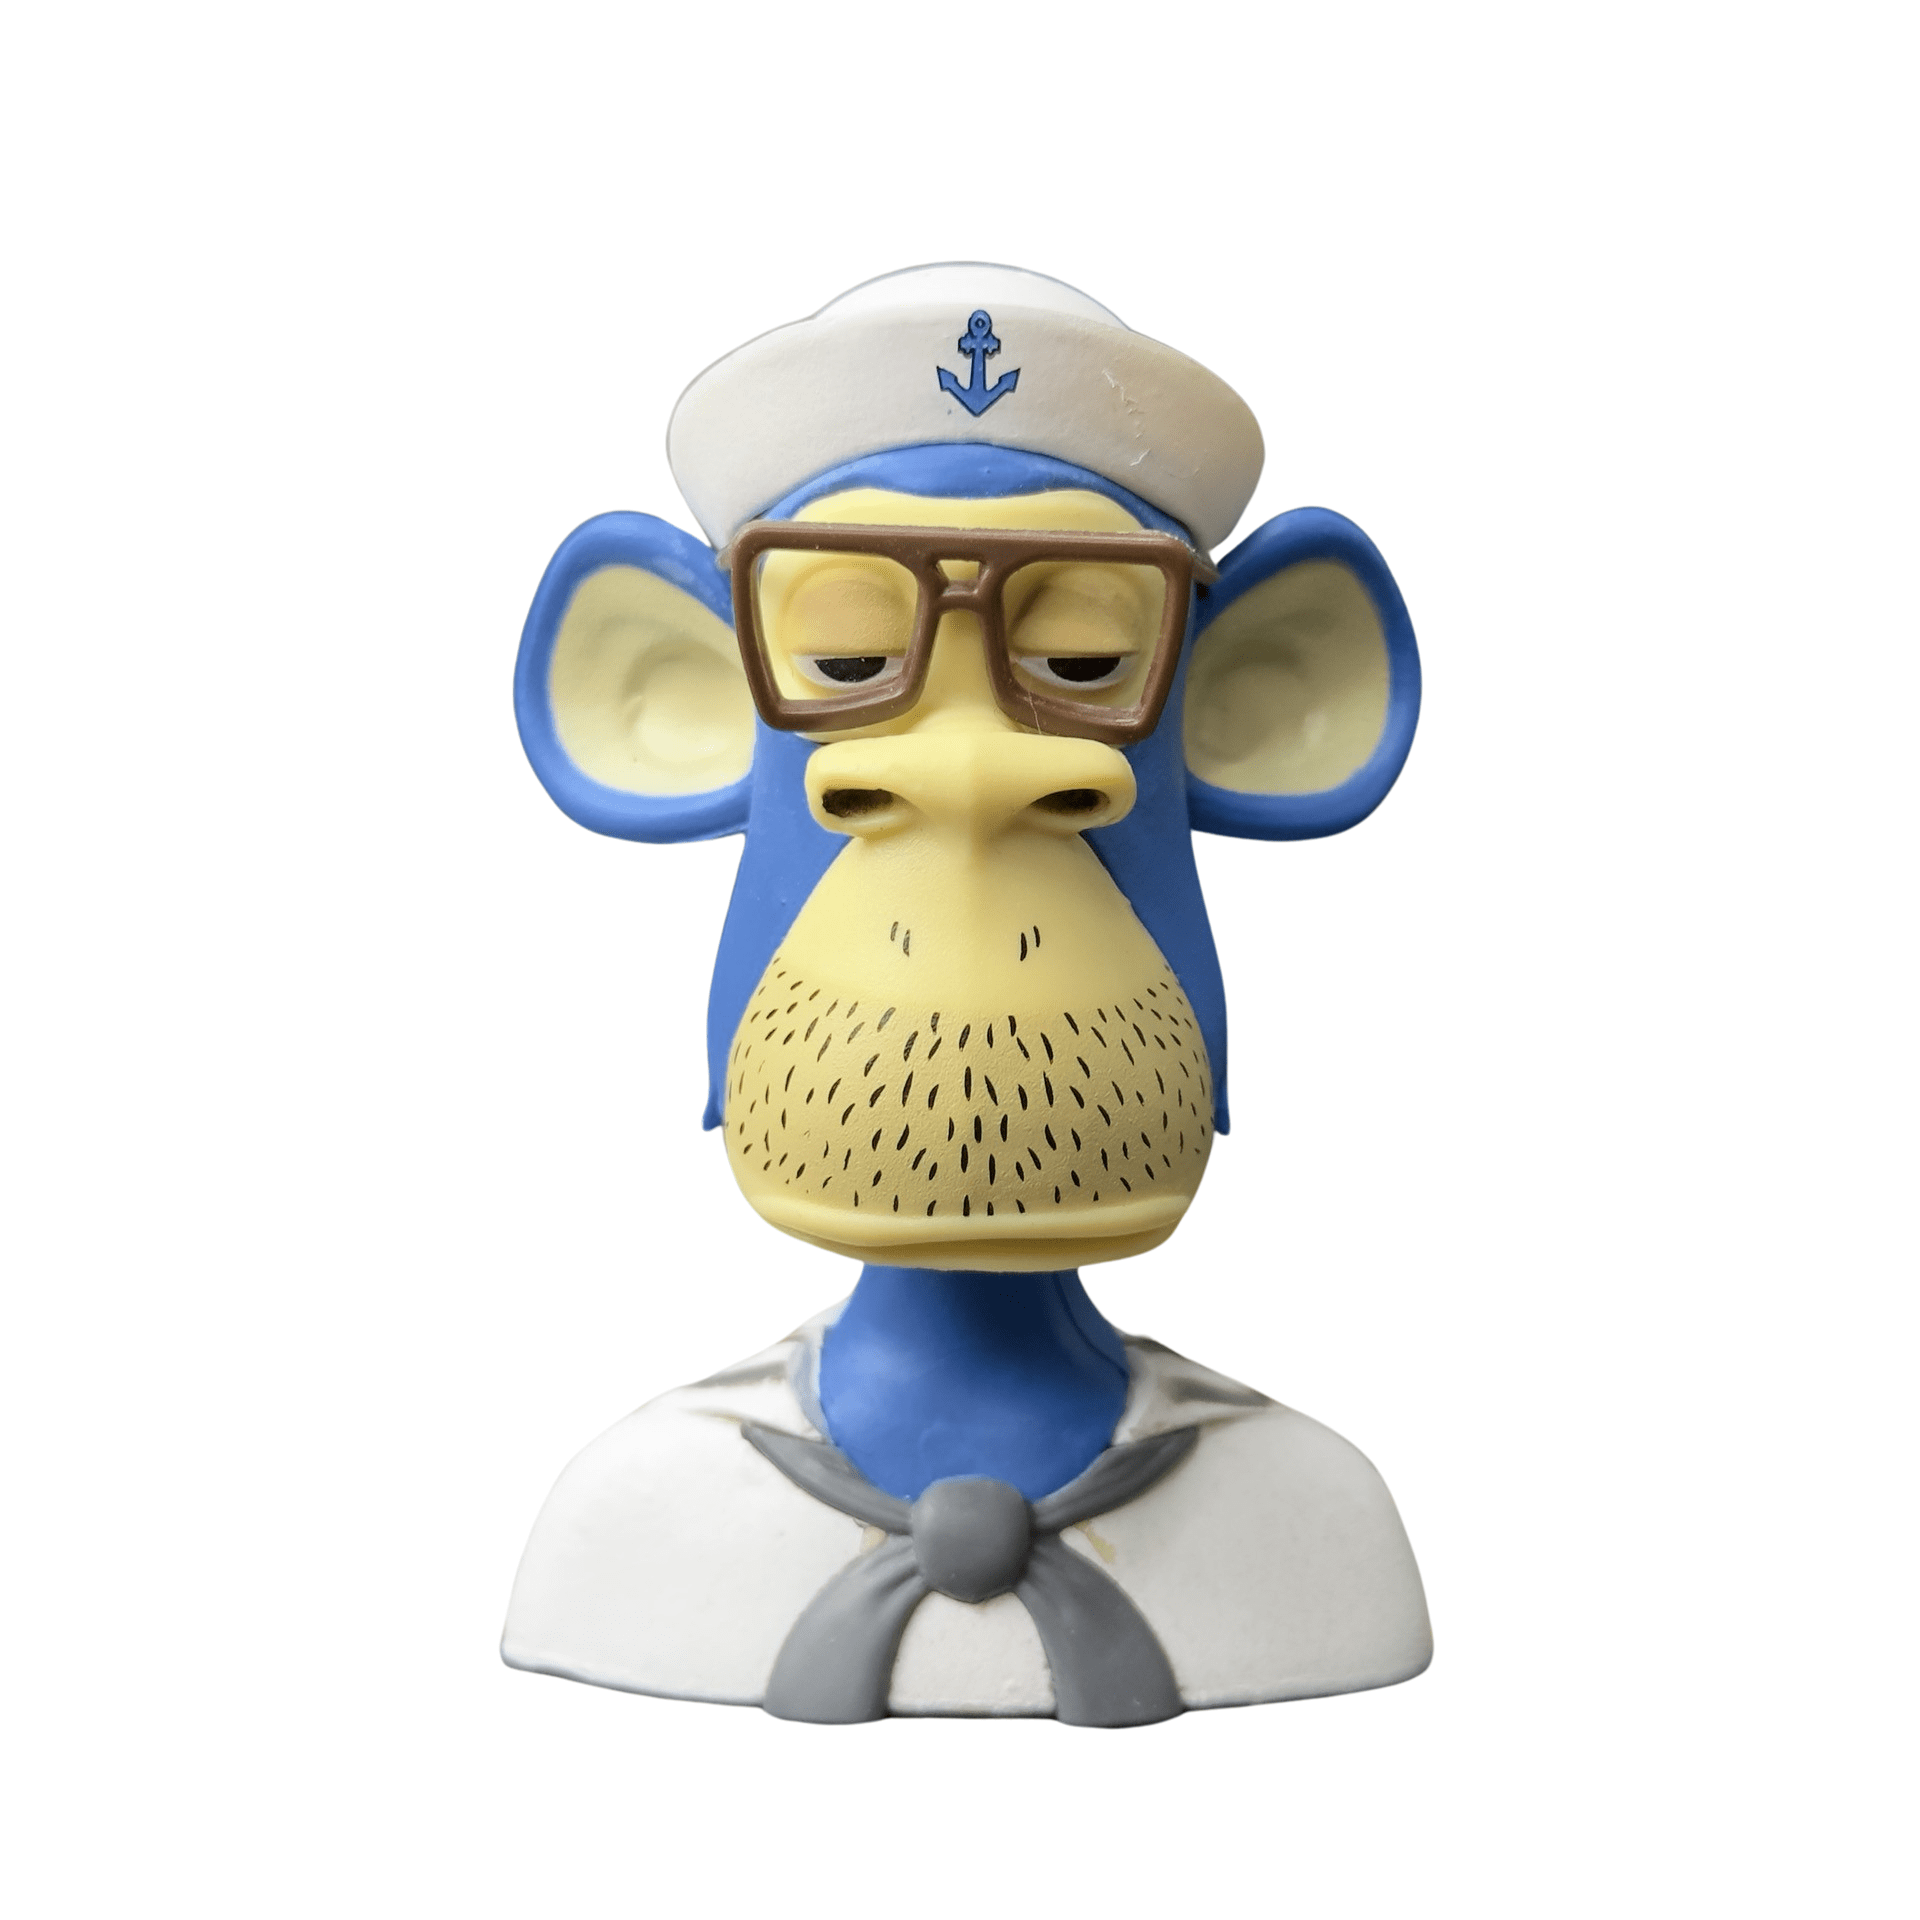 NFTY Figs Series 1 3 Figure By Bored Ape Yacht Club (#5182) 01 | Monkey Paw Mexico